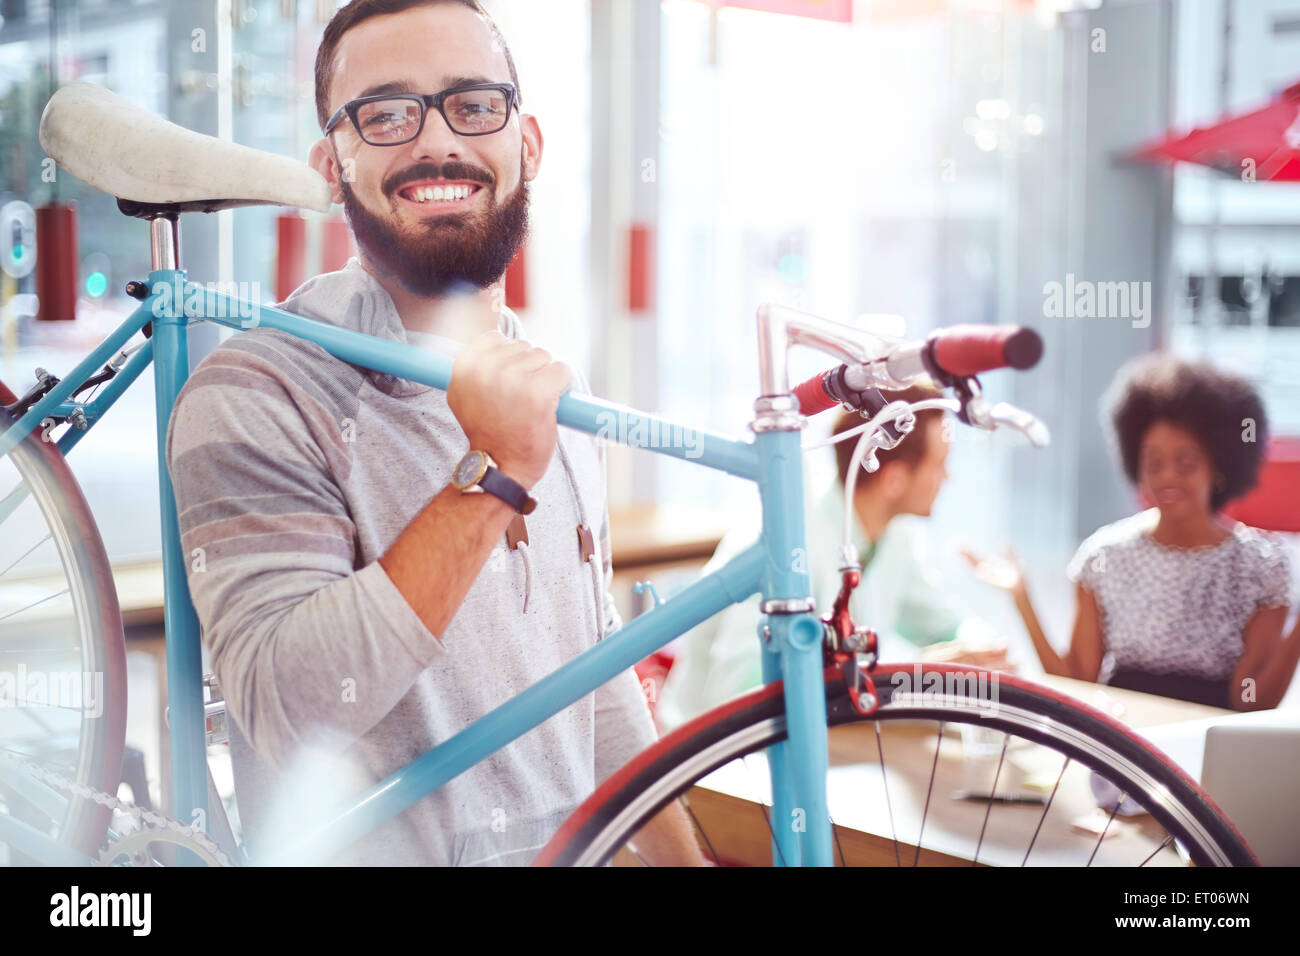 Smiling man carrying bicycle in cafe Stock Photo